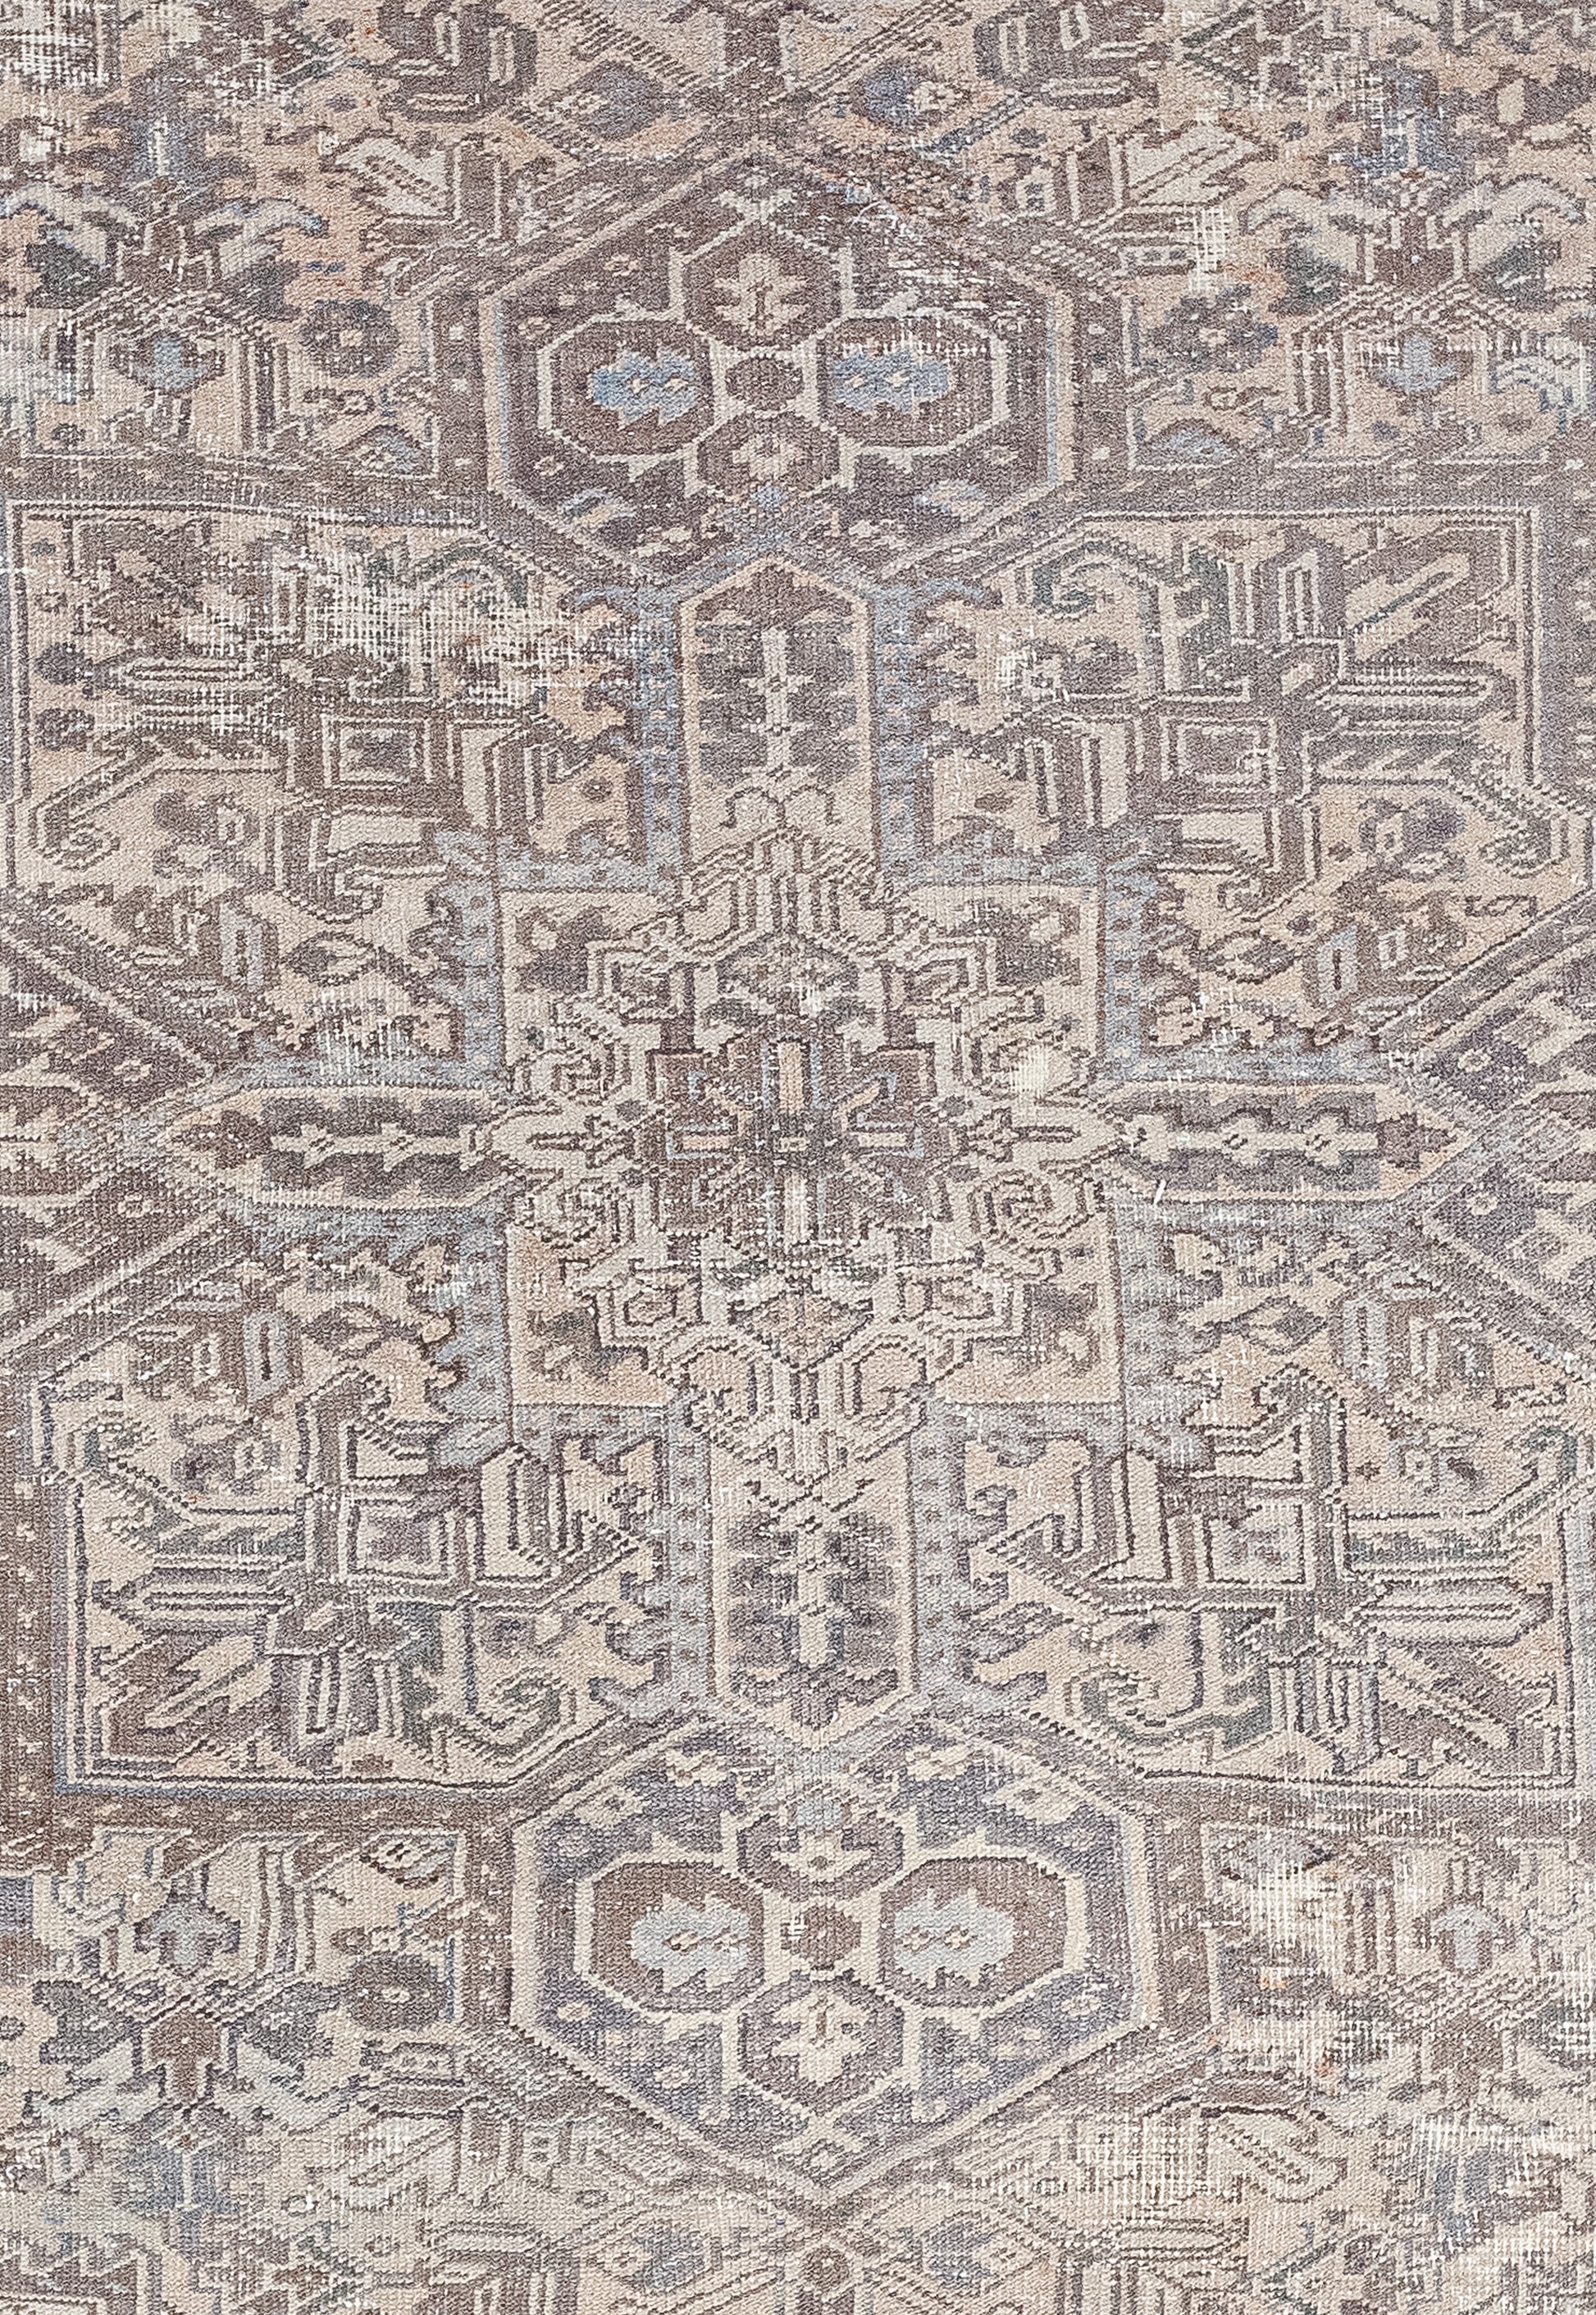 The center of the rug features a square cross that is made up of many tribal symbols that are also found throughout the rug.